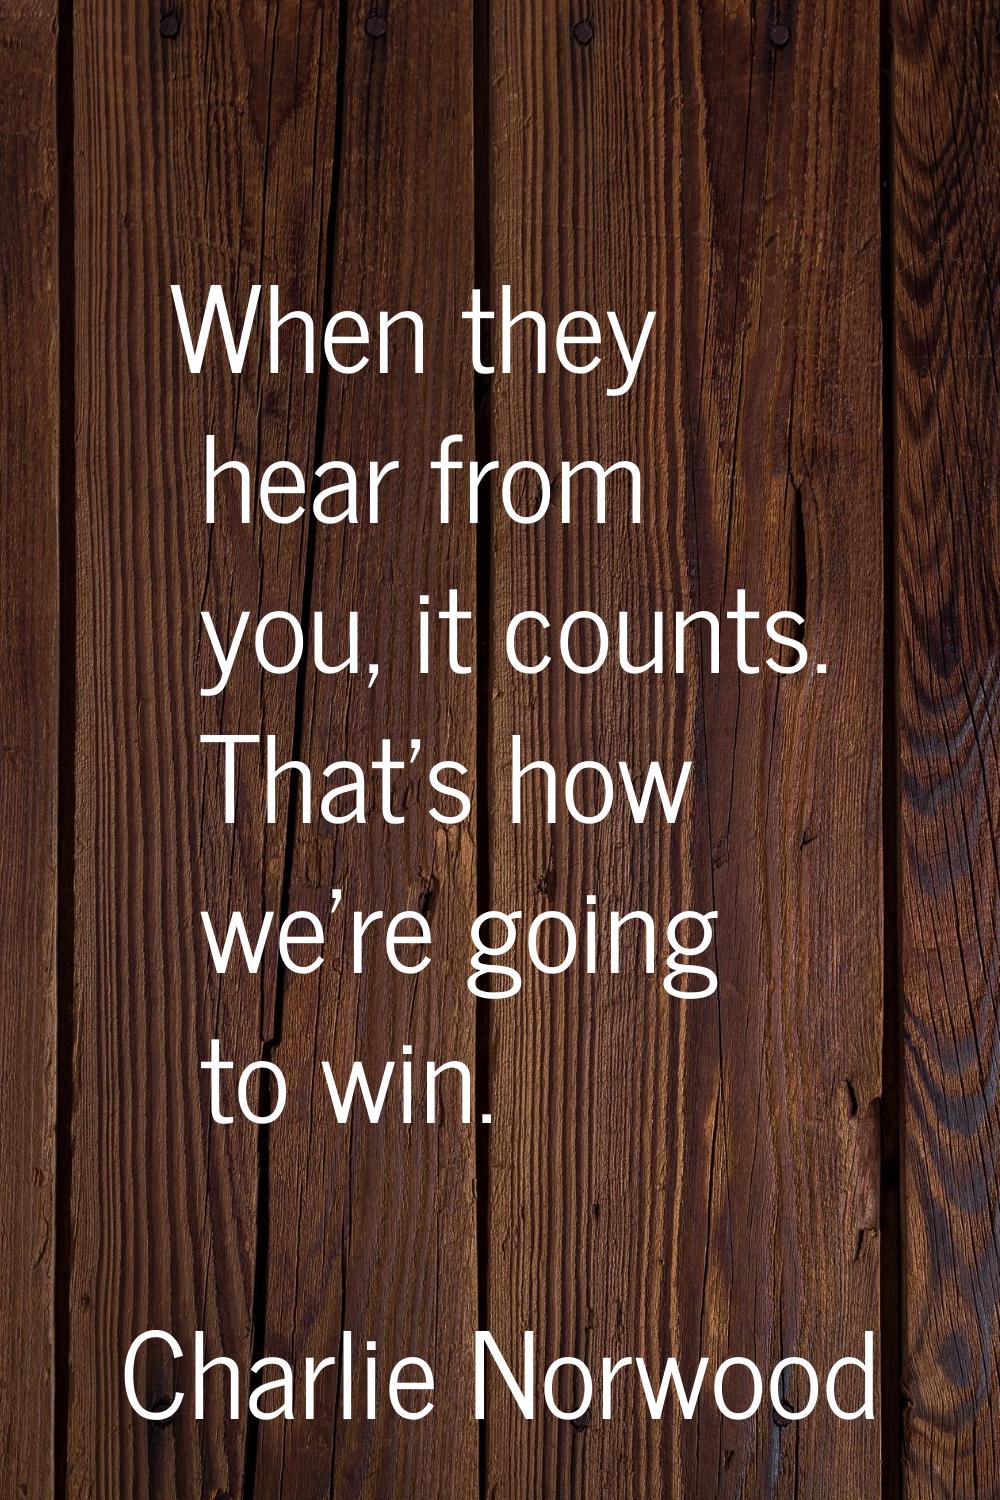 When they hear from you, it counts. That's how we're going to win.